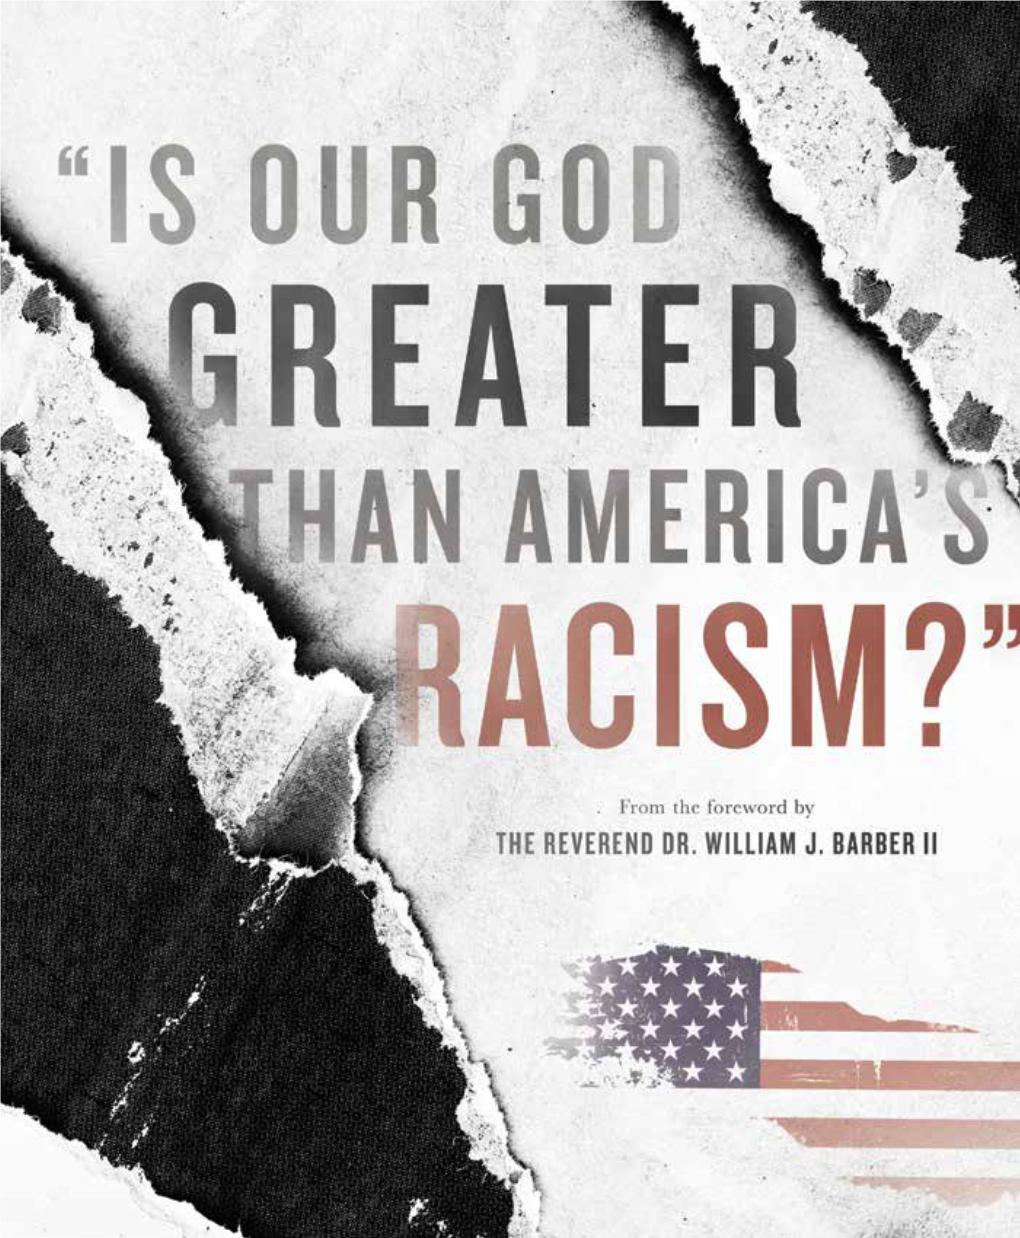 “Is Our God Greater Than America's Racism?”